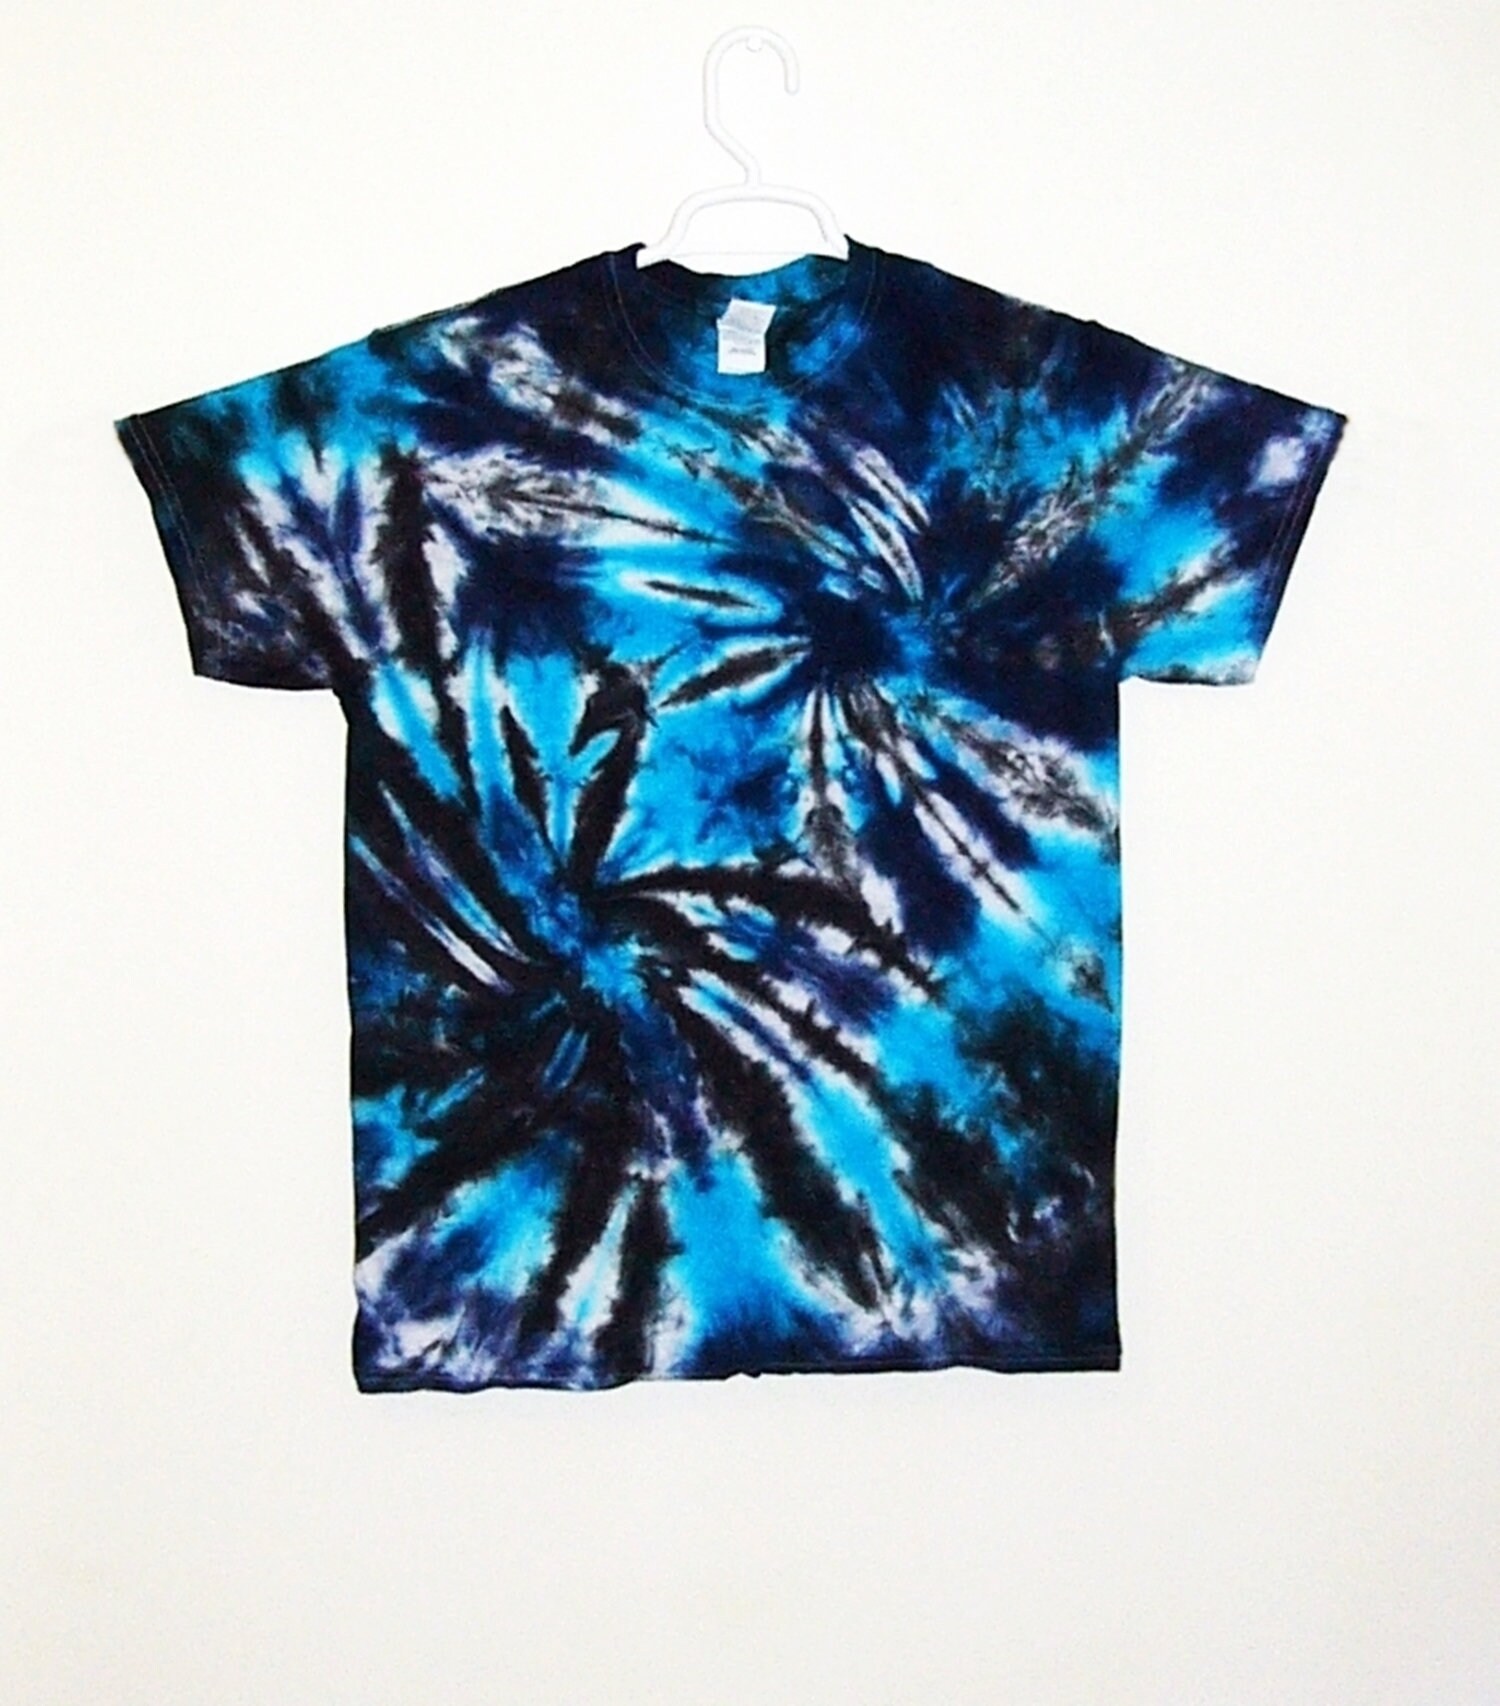 Hoovercrafted Catch A Wave Tie Dye Spiral T-Shirt